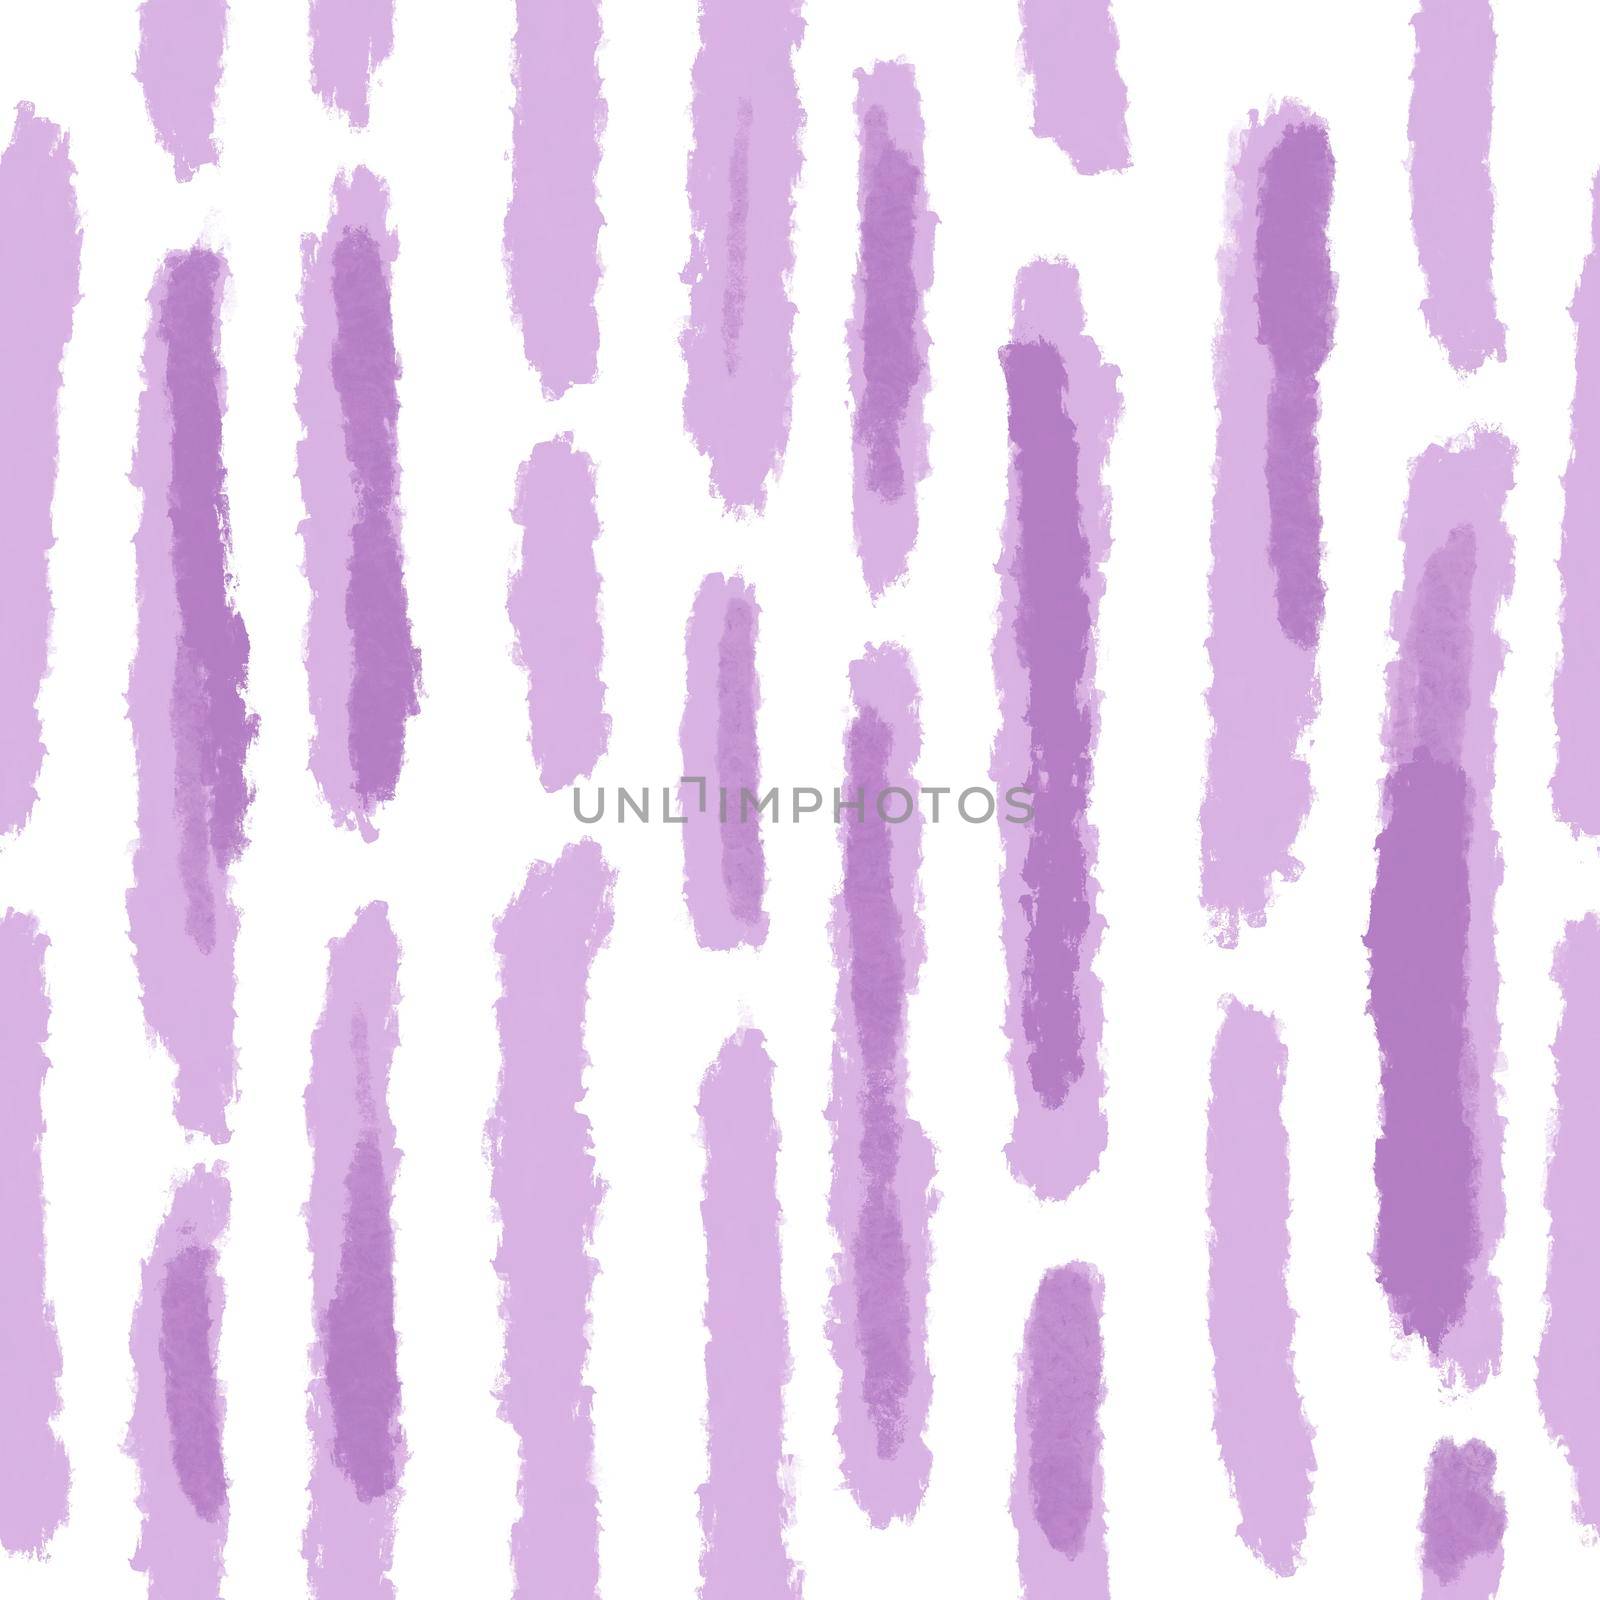 Seamless hand drawn purple stripes abstract geometric pastel pattern. Mid century modern trendy fabric print, line curve minimalist background for wallpaper wrapping paper textile